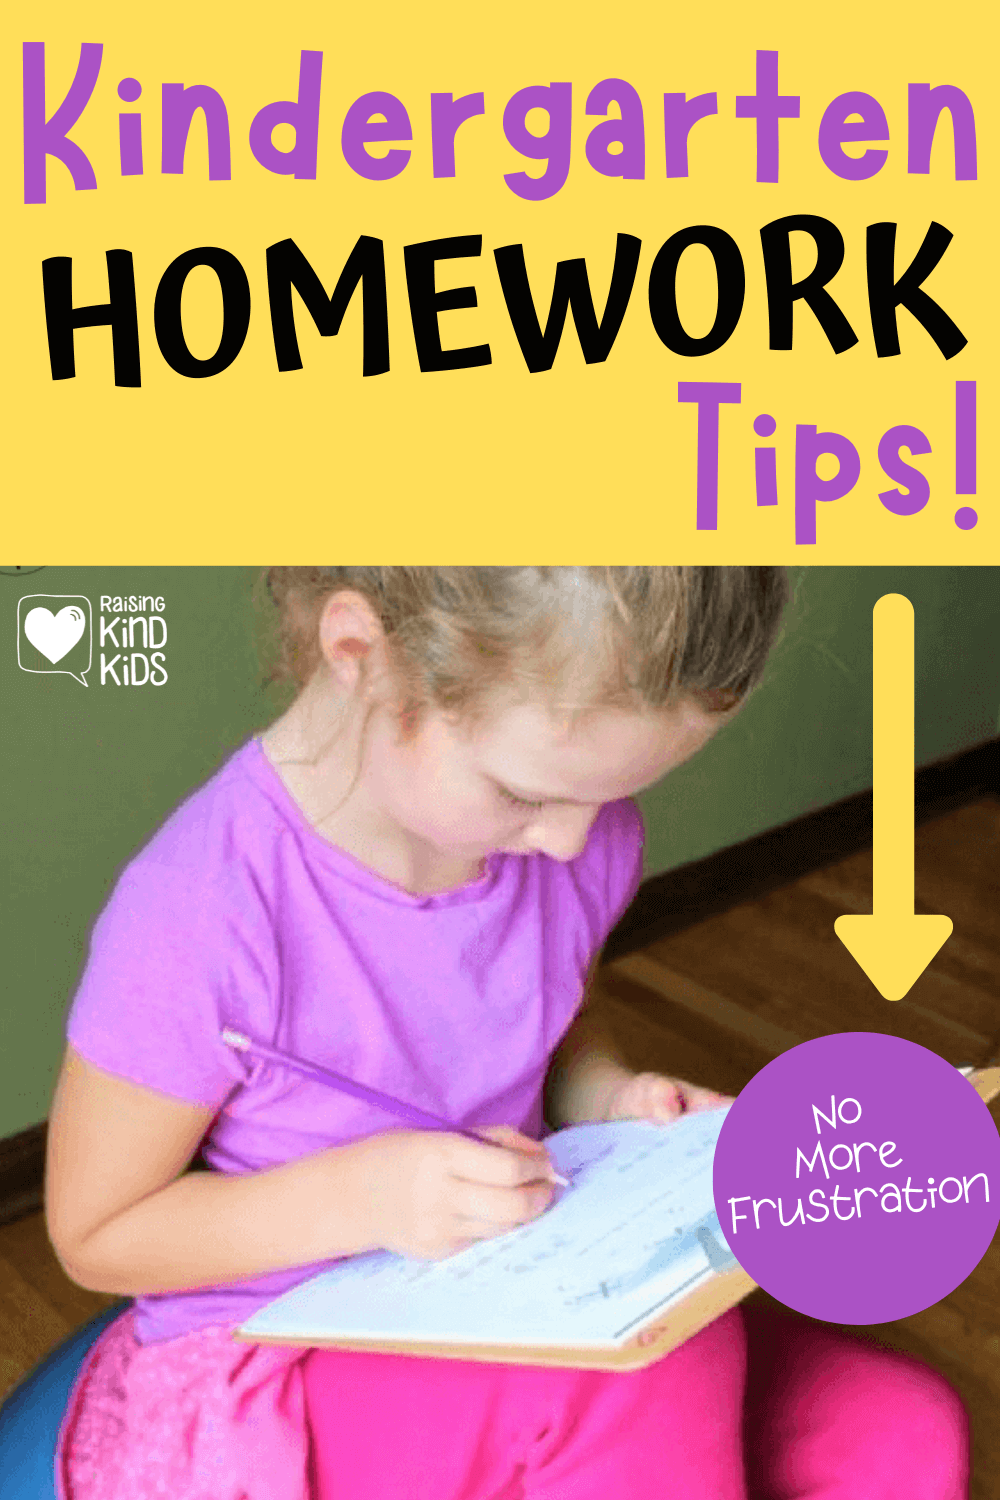 Does your Kindergartner struggle with sitting still long enough to complete their homework? These tips and tricks will help them finish their homework. www.coffeeandcarpool.com